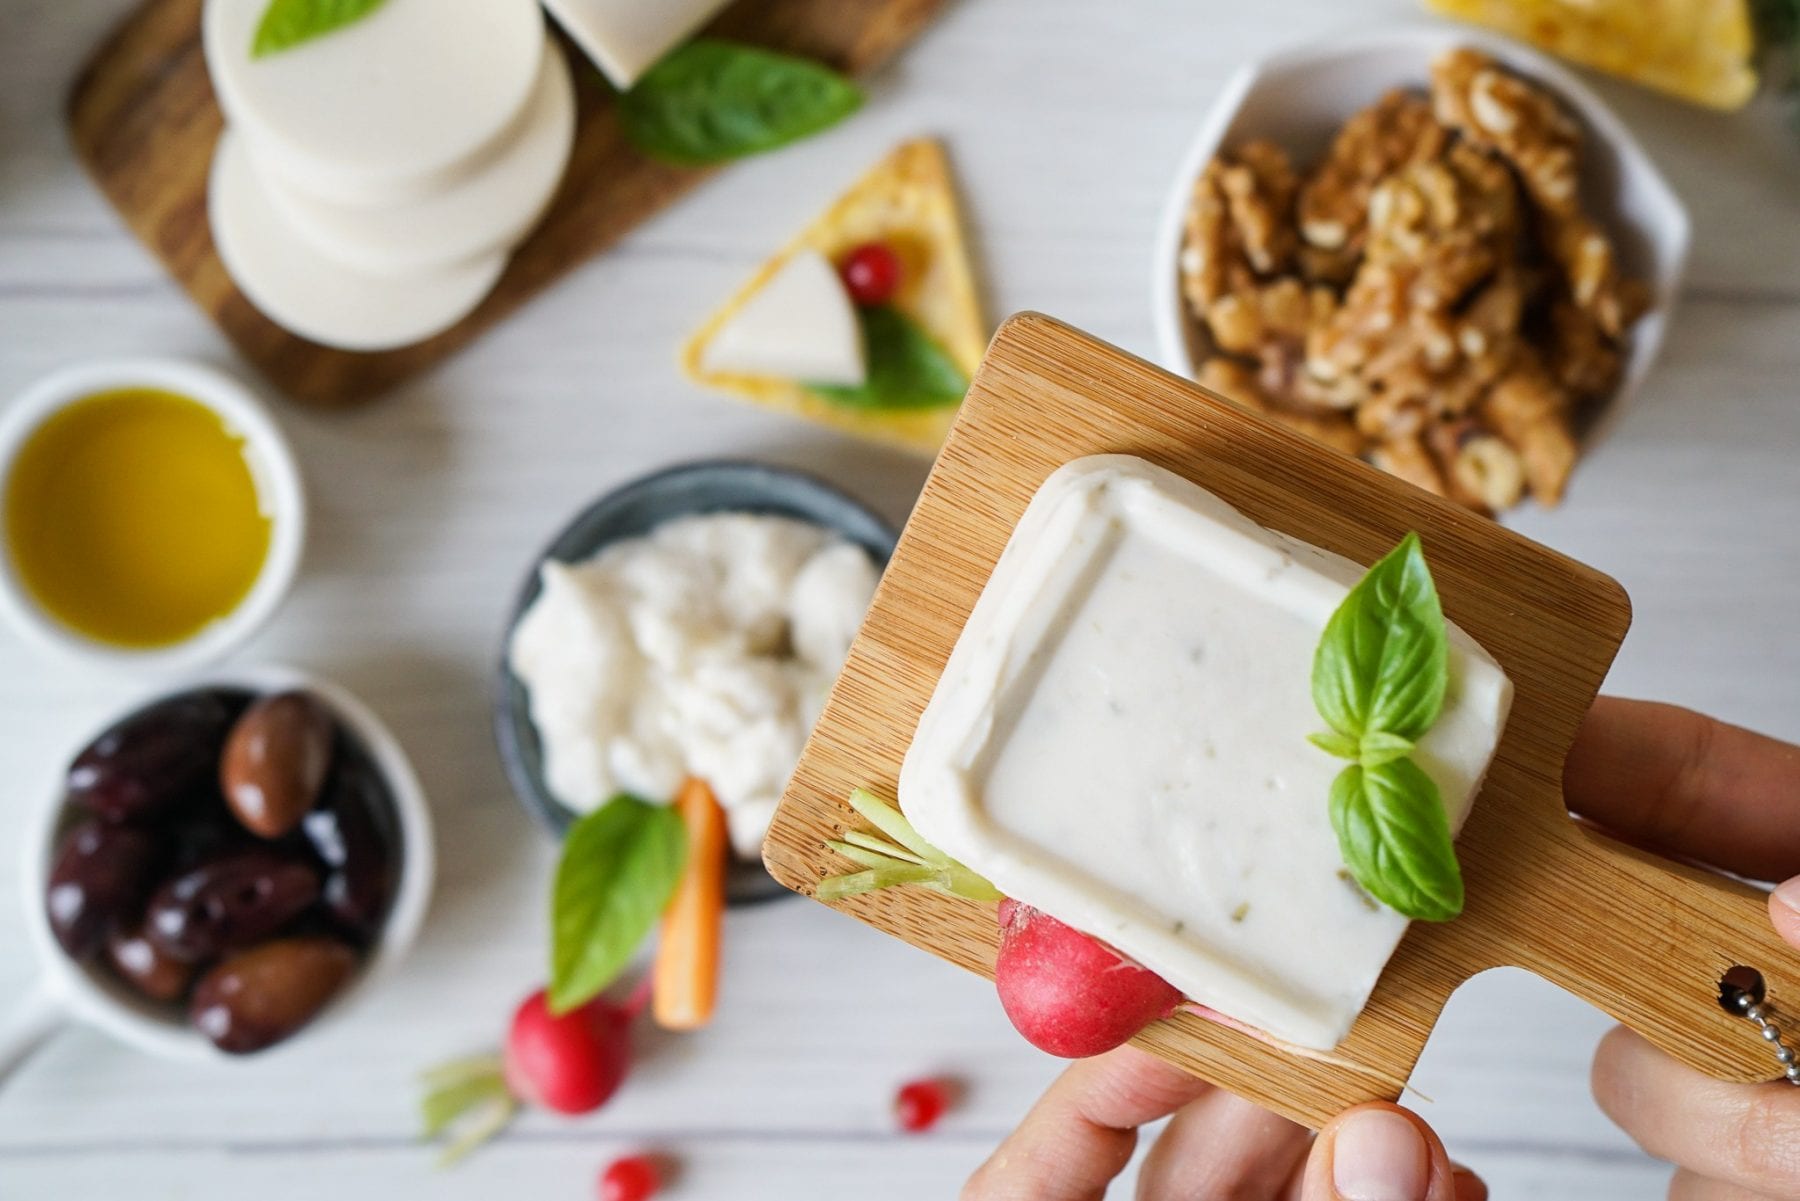 How To Build The Best Dairy-Free Cheese Platter Italian Style